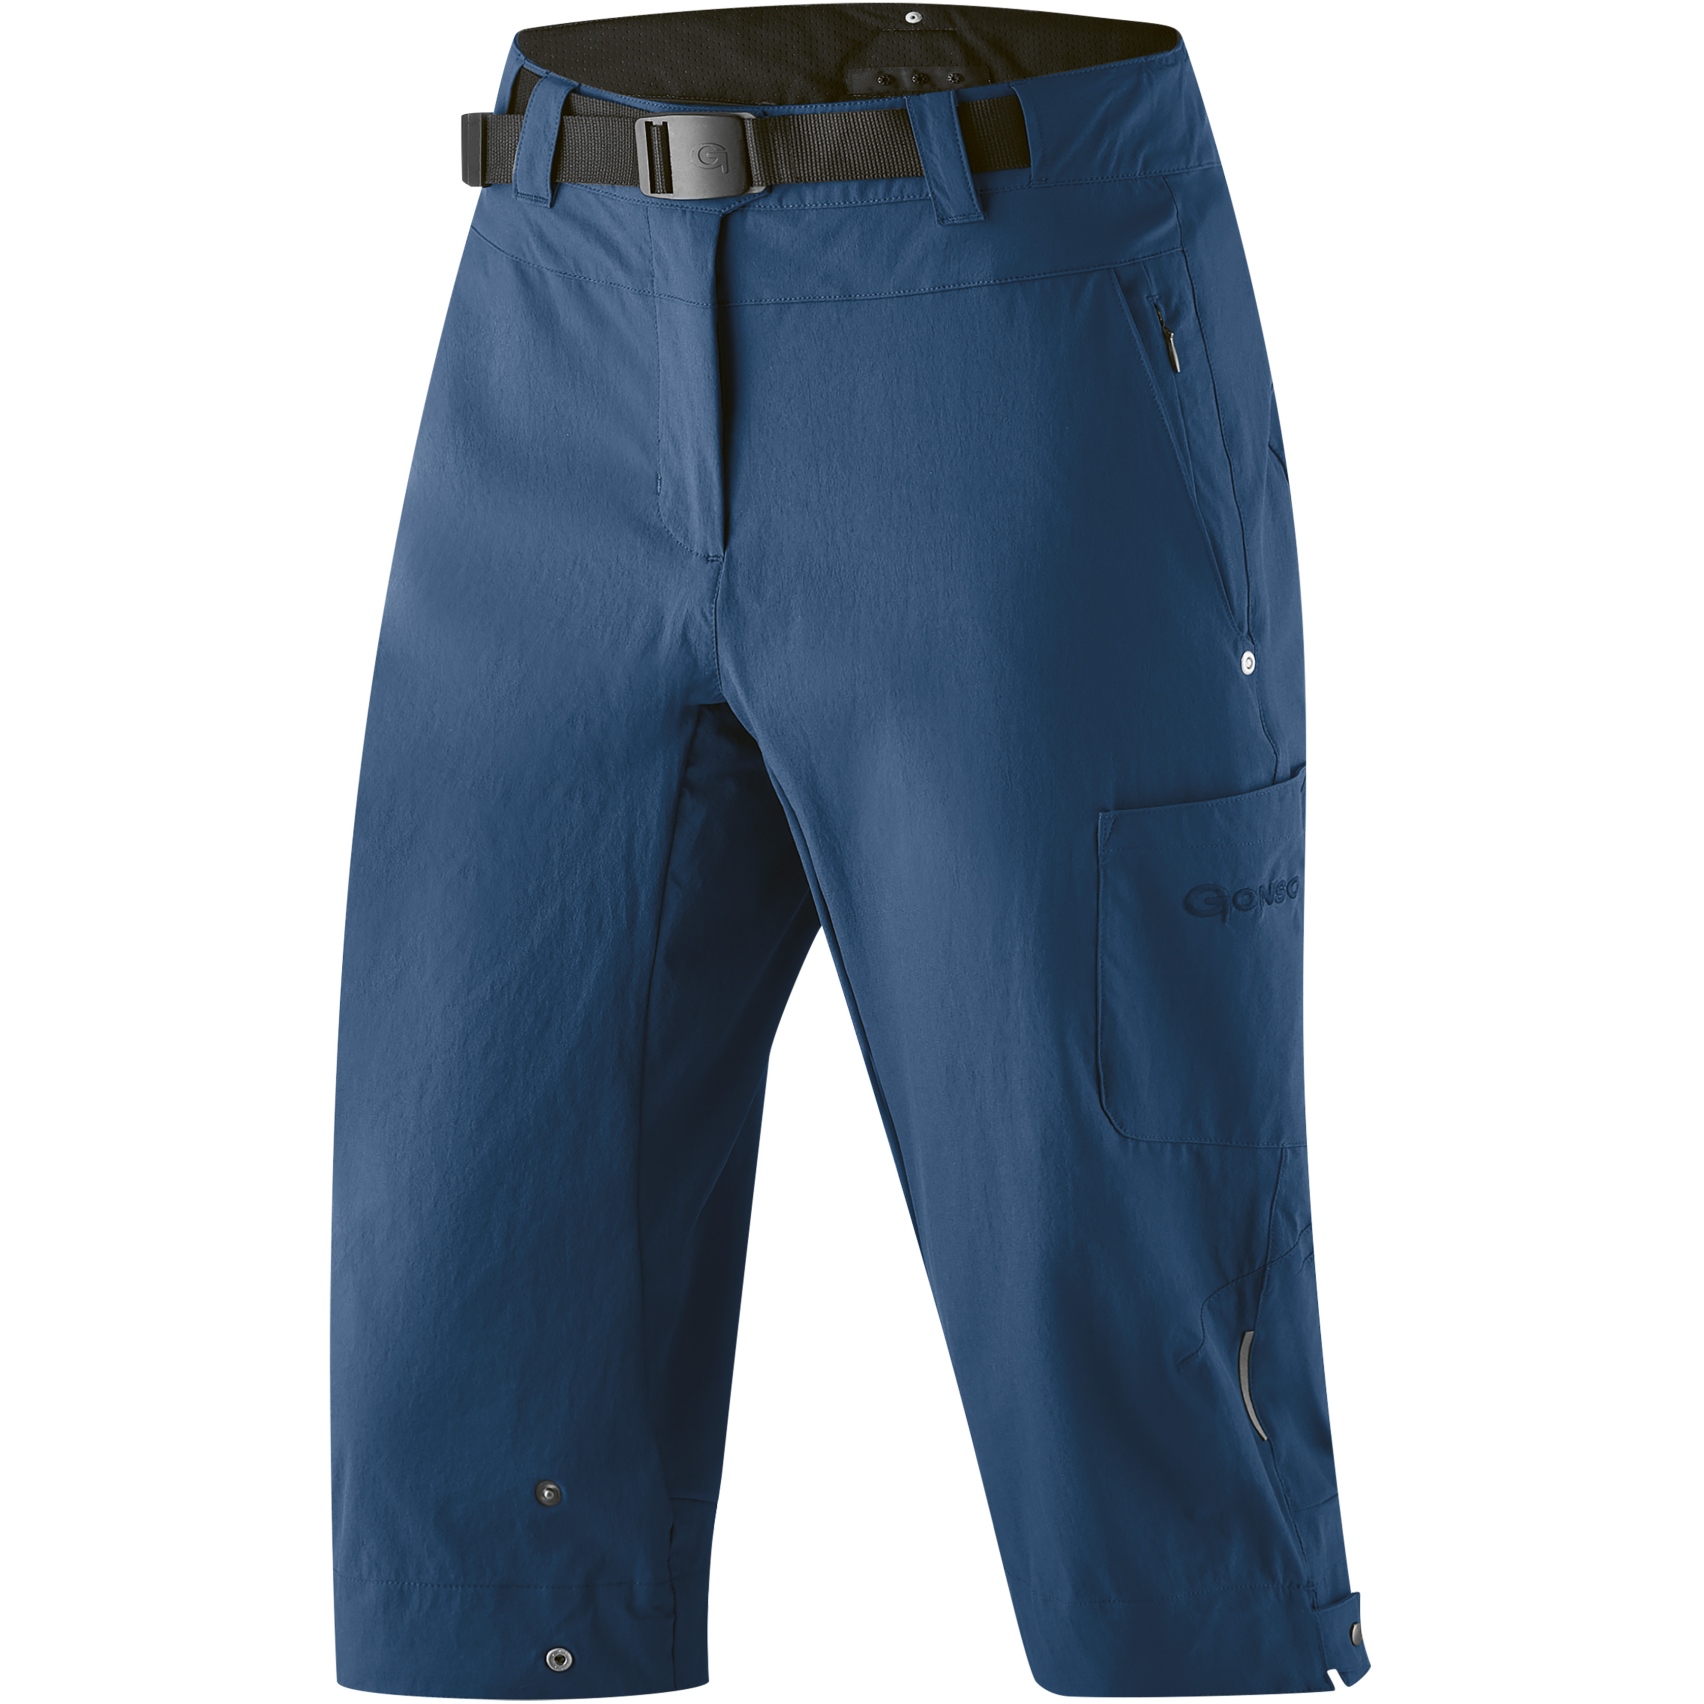 Picture of Gonso Ruth 3/4 Bike Pants Women - Insignia Blue